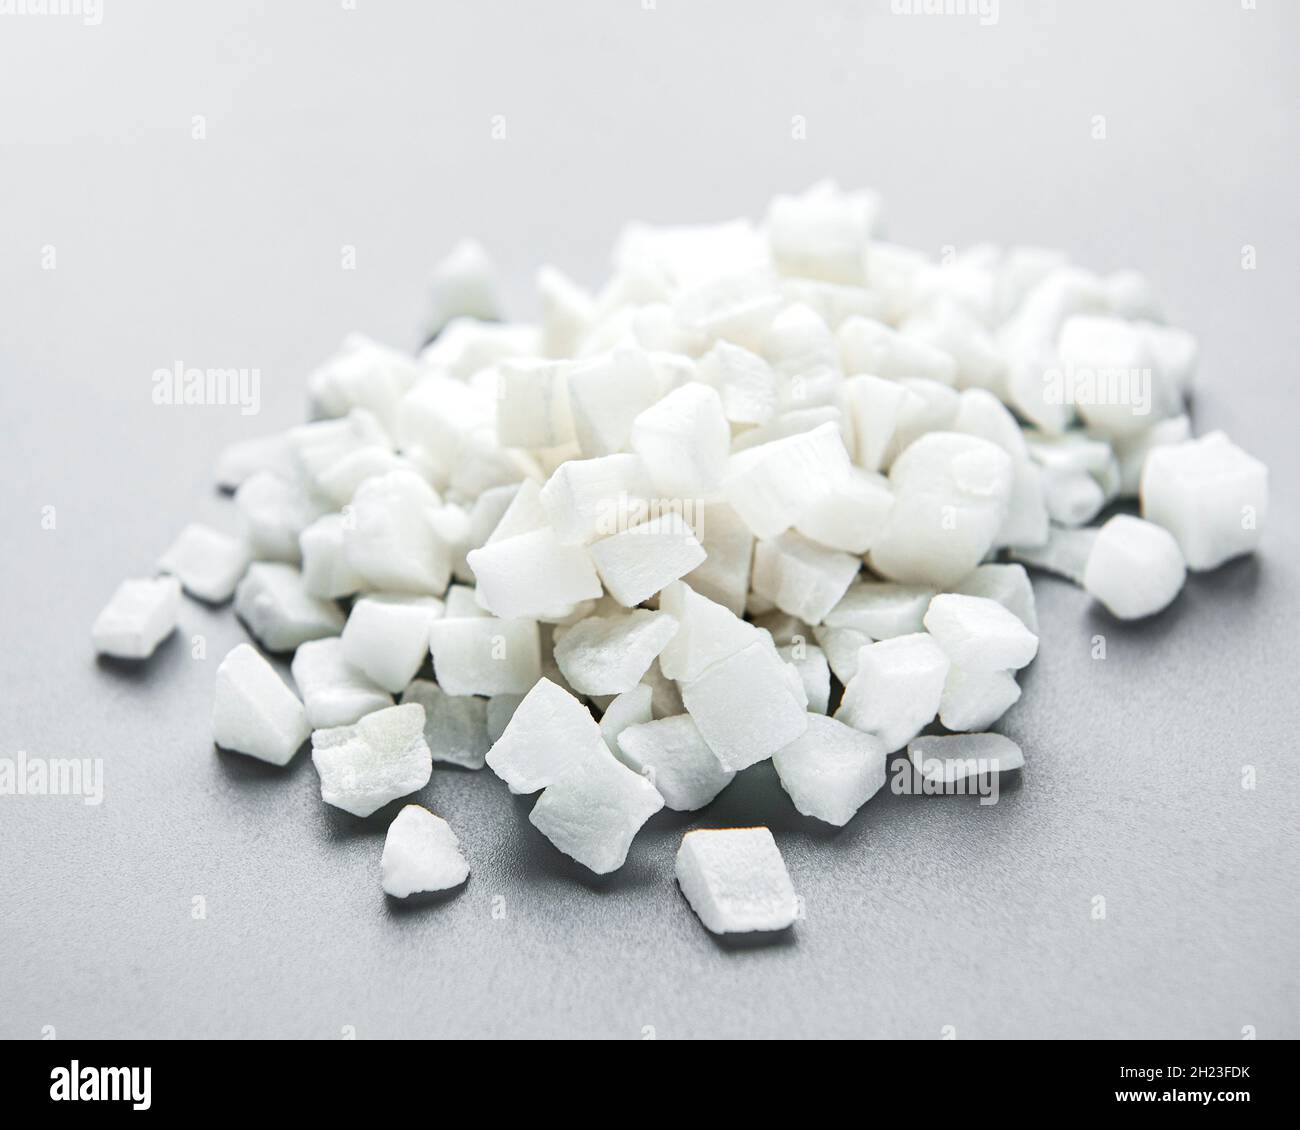 Dried sweet coconut cubes on a white background. Stock Photo